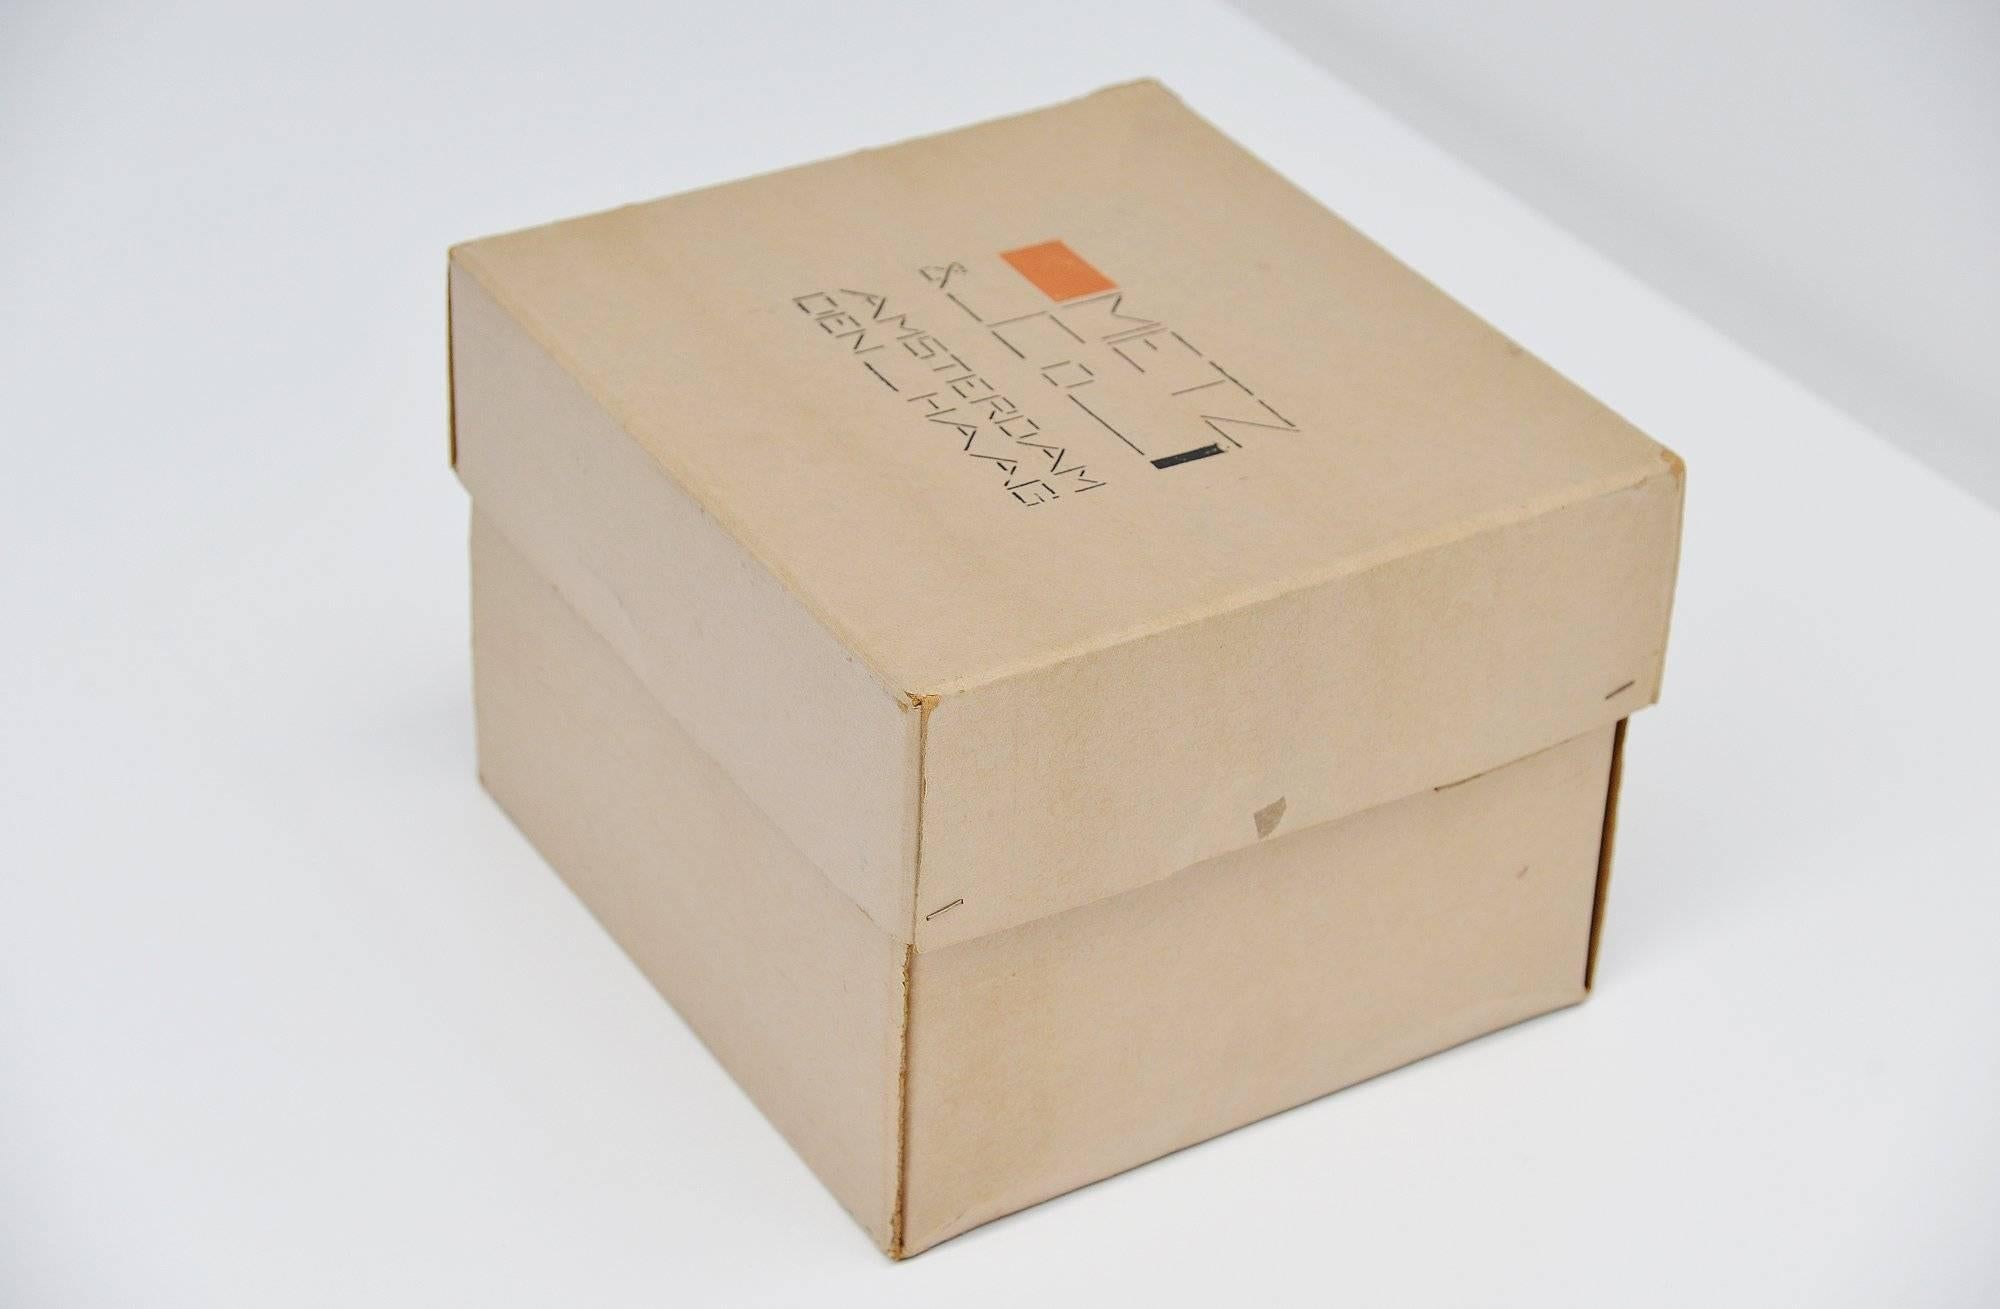 Very nice large storage box designed by Bart van der Leck for Metz & Co in 1935. These boxes were designed as present/packaging boxes for the Metz & Co shop in Amsterdam and Den Haag and were used from 1935-1952. This is for a very nice large